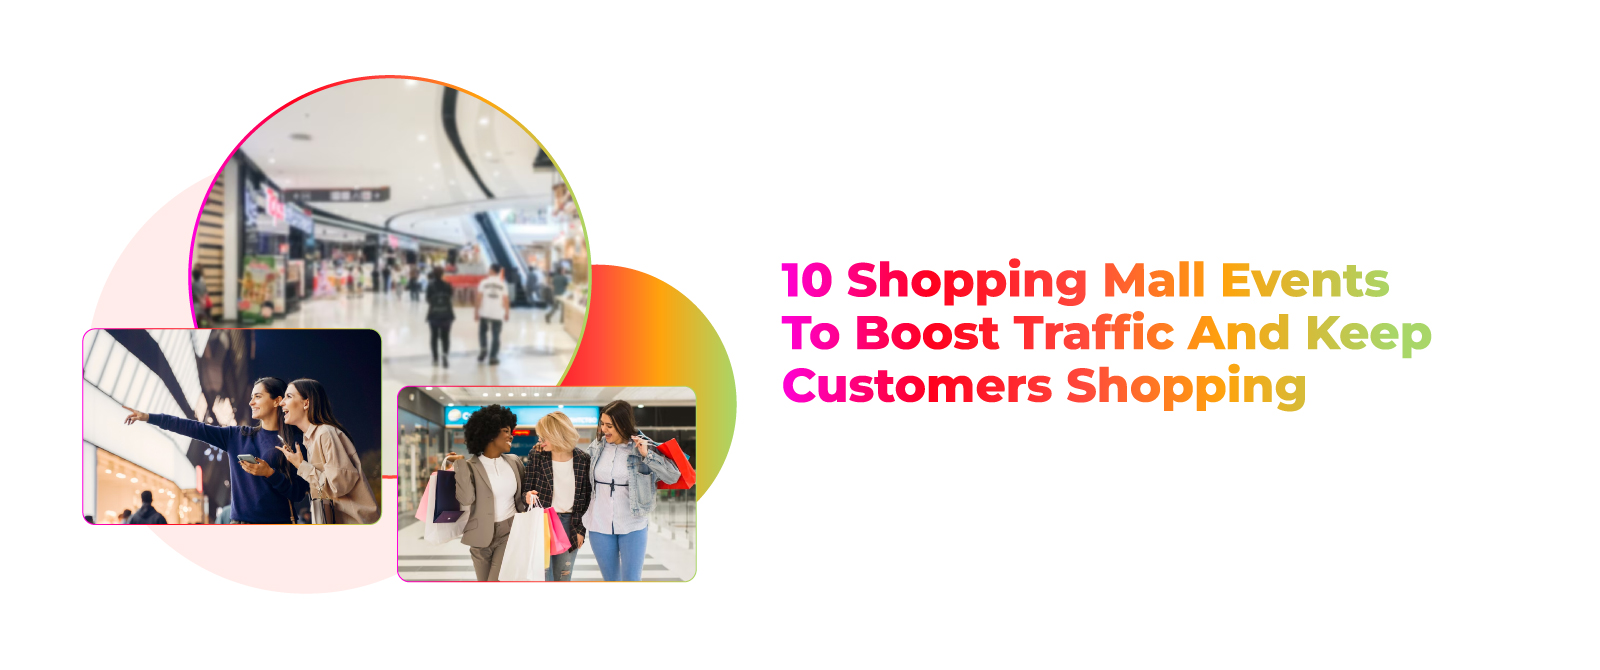 10 Shopping Mall Events to Boost Traffic and Keep Customers Shopping